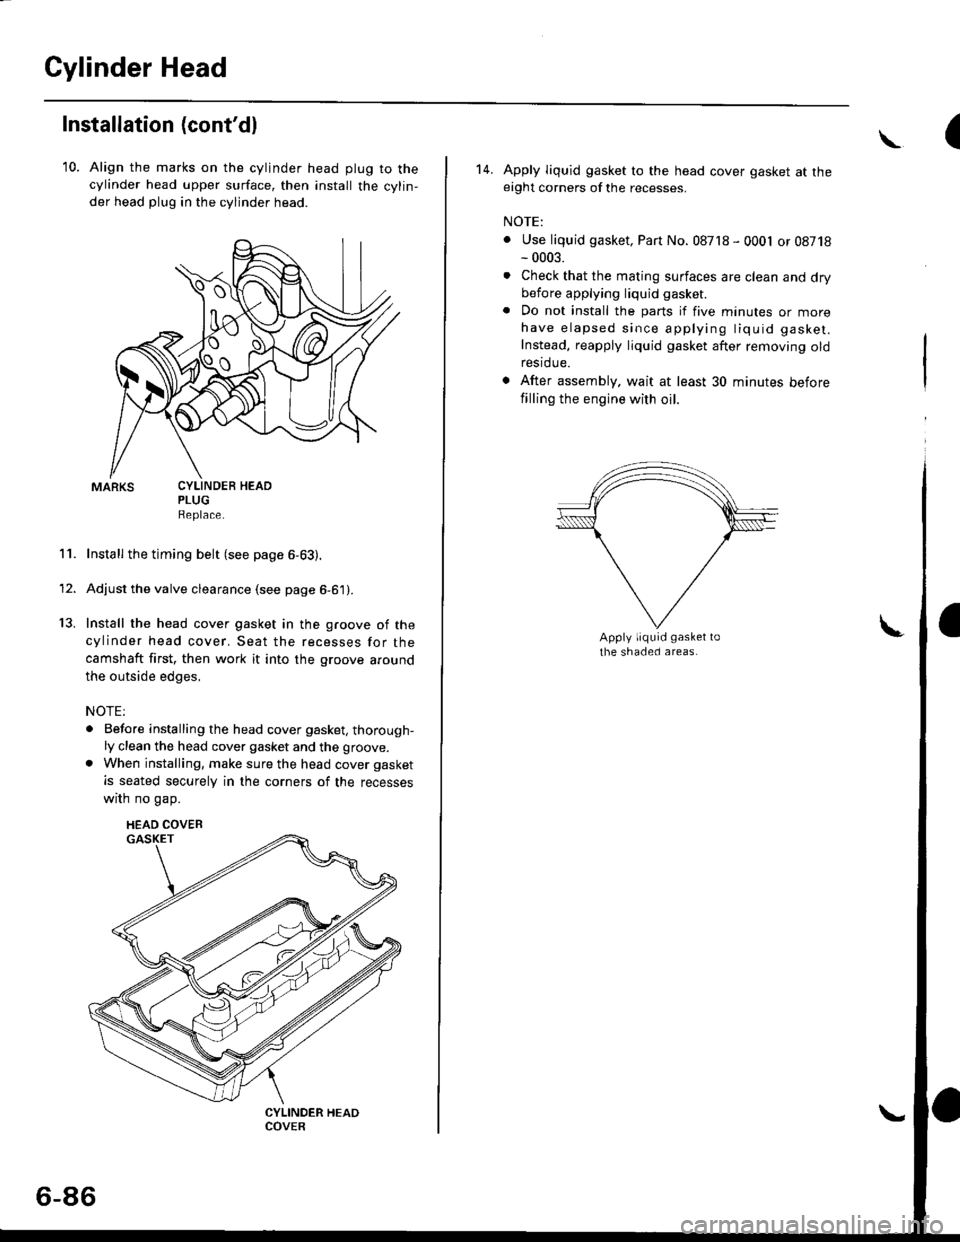 HONDA CIVIC 2000 6.G Service Manual Cylinder Head
Installation (contdl
10. Align the marks on the cylinder head plug to thecylinder head upper surface, then install the cylin,
der head plug in the cylinder head.
PLUGReplace.
Install th